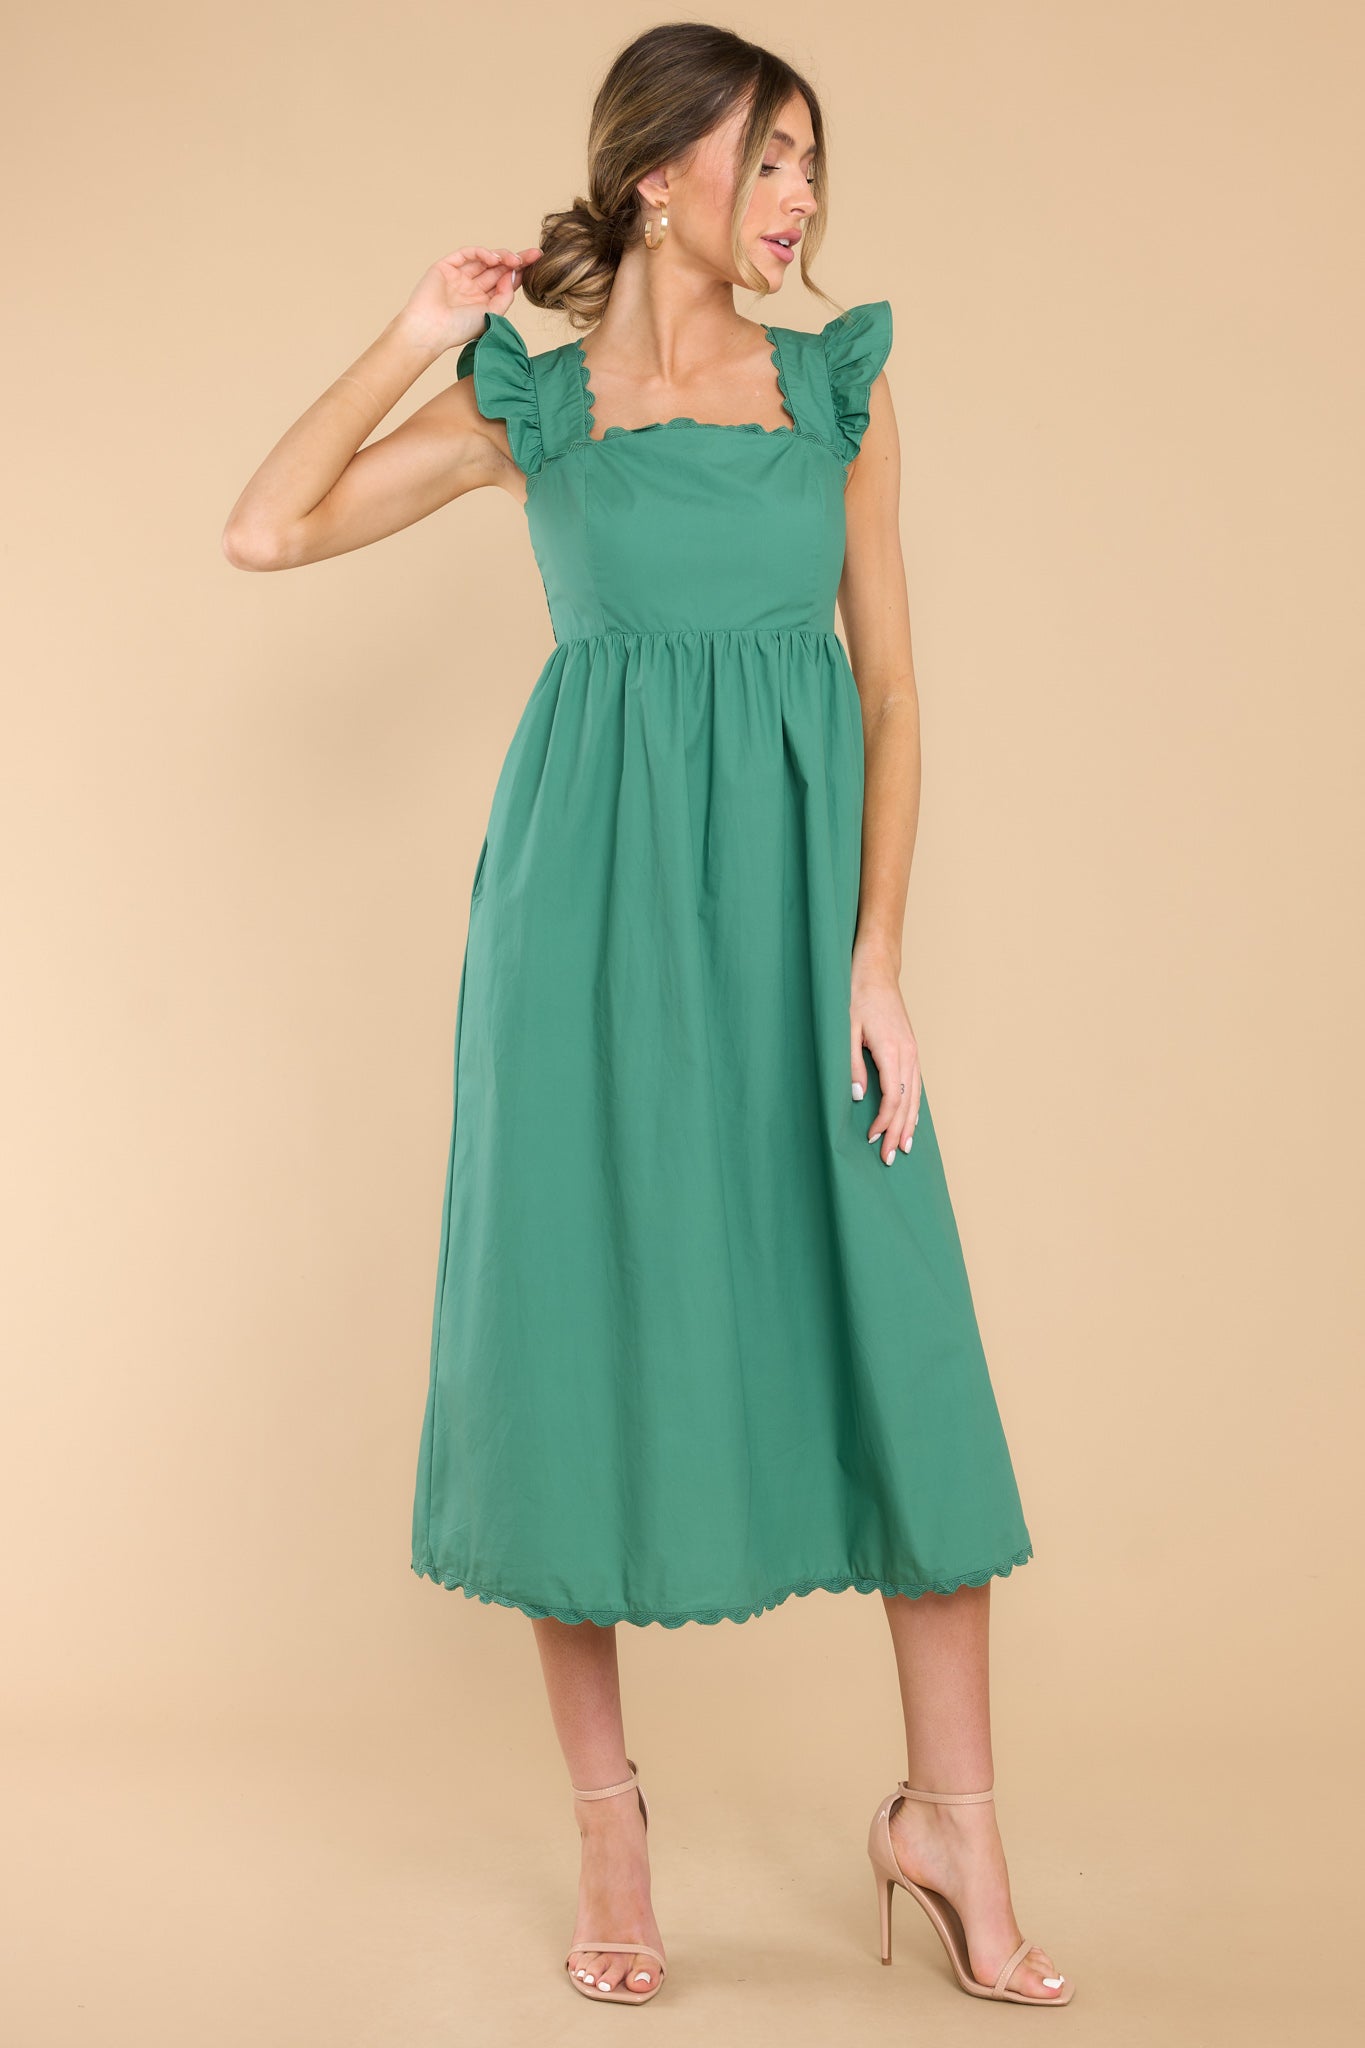 Our Greatest Love Green Midi Dress - Red Dress